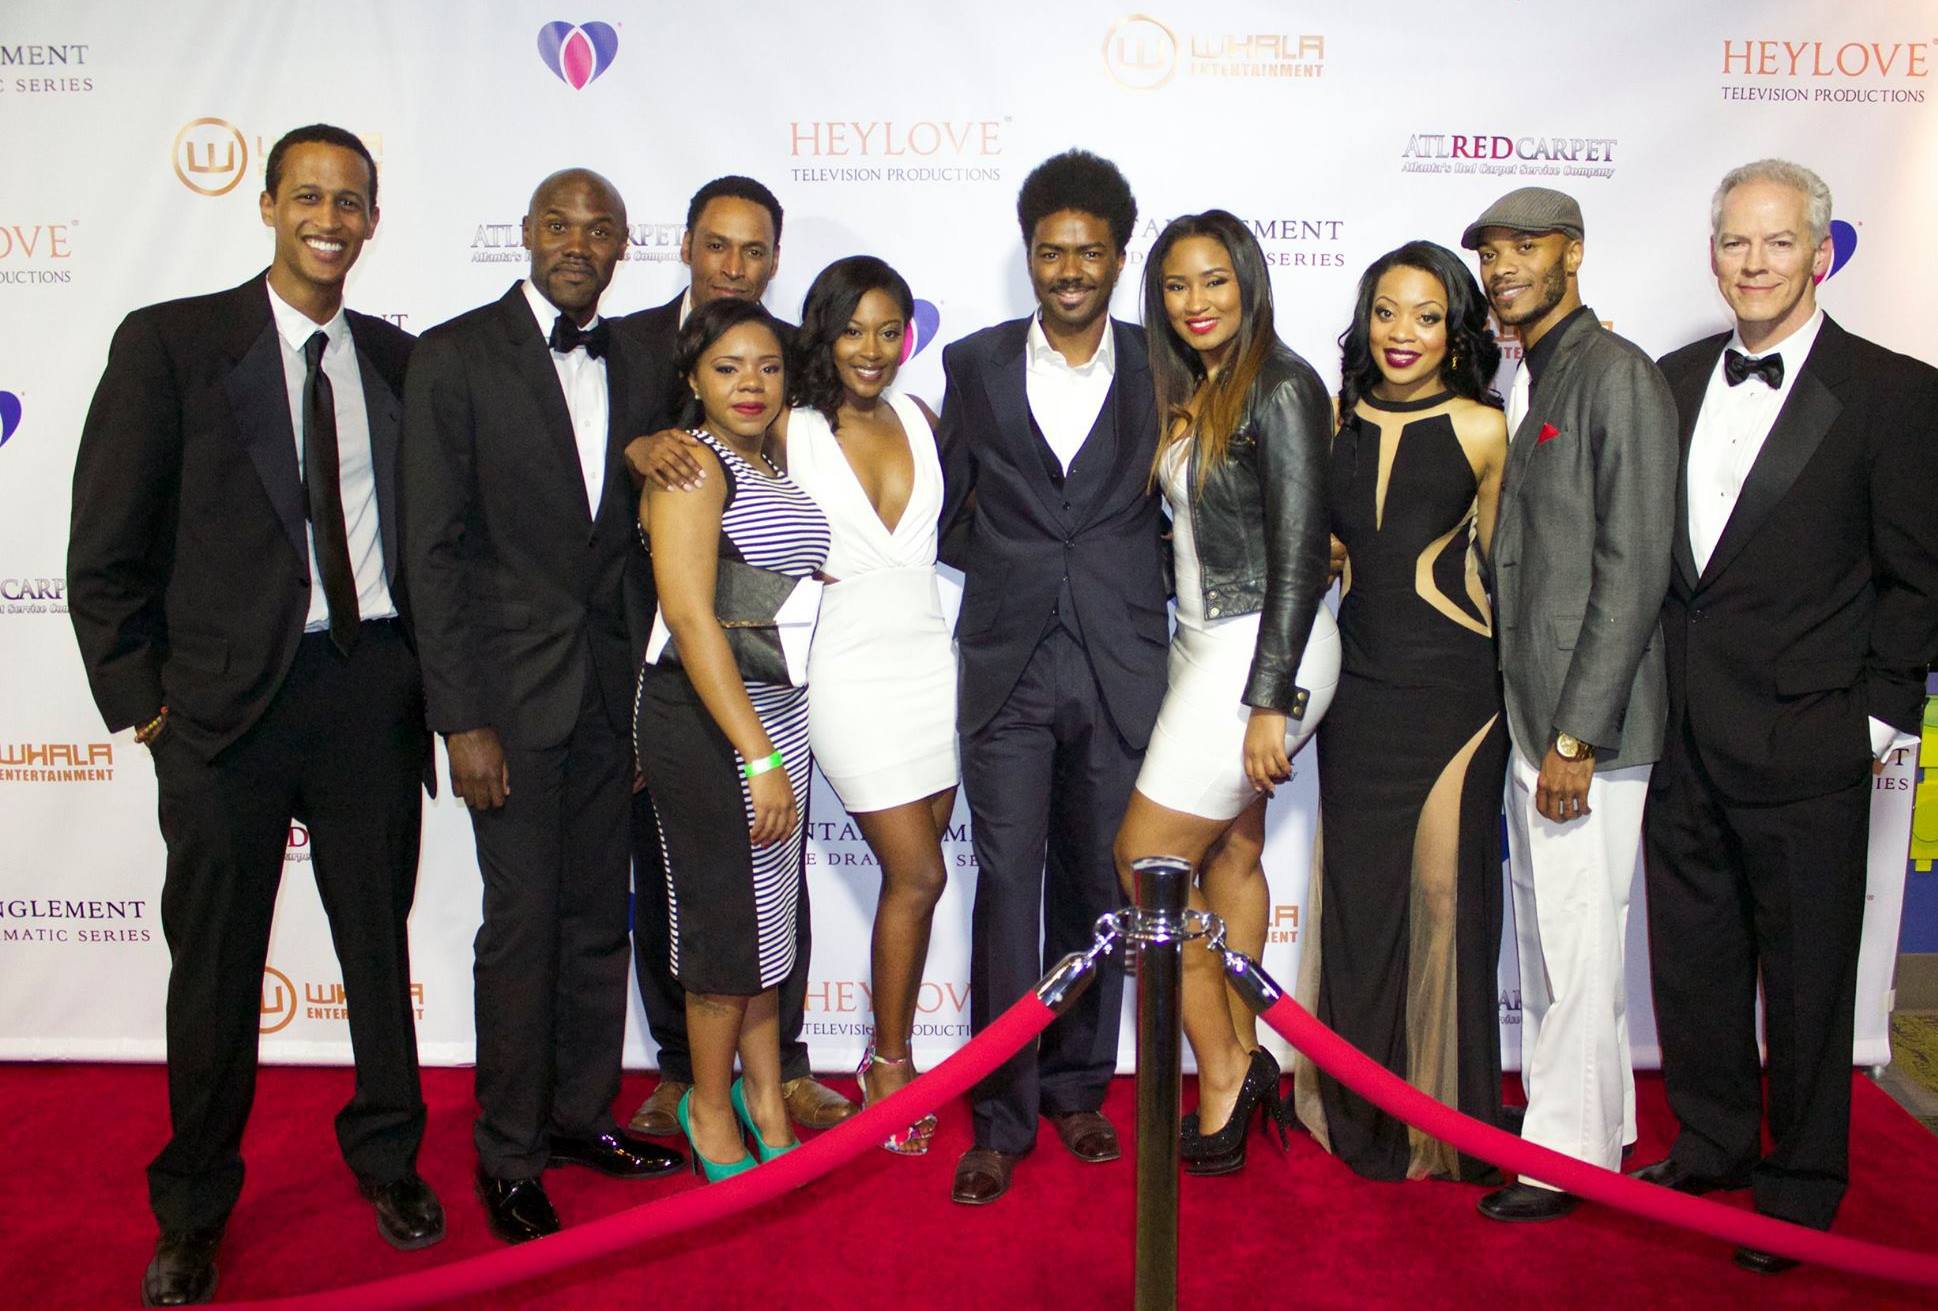 The cast of 'Entanglement : The Dramatic Series' at the red carpet premiere in Atlanta with producers Omar Howard and Diallo M Jeffery